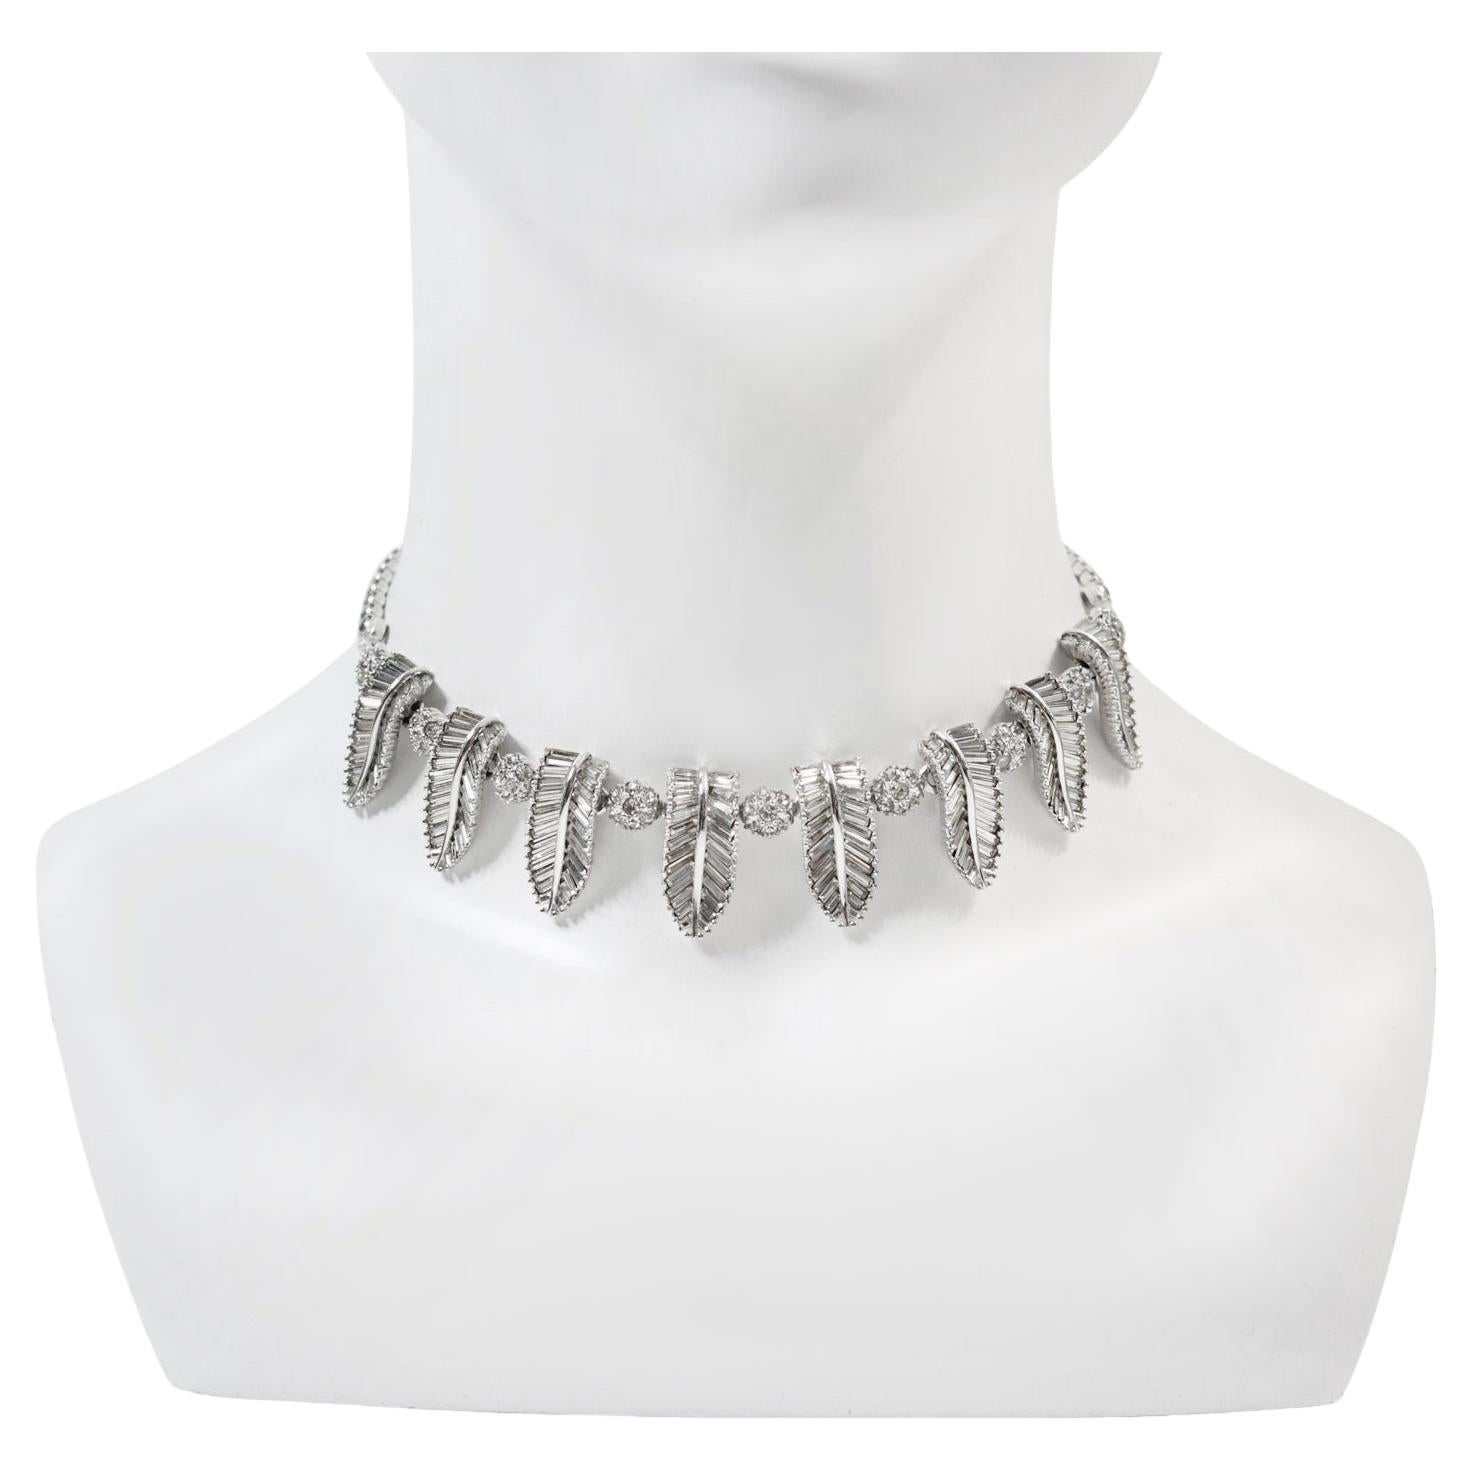 Vintage Pennino Baguette and Pave Art Deco Choker Circa 1960s.  This is a gorgeous choker necklace from Pennino.  They made such magnificent items which gives them the illusion of being fine jewelry. The design of this looks almost like an inlaid